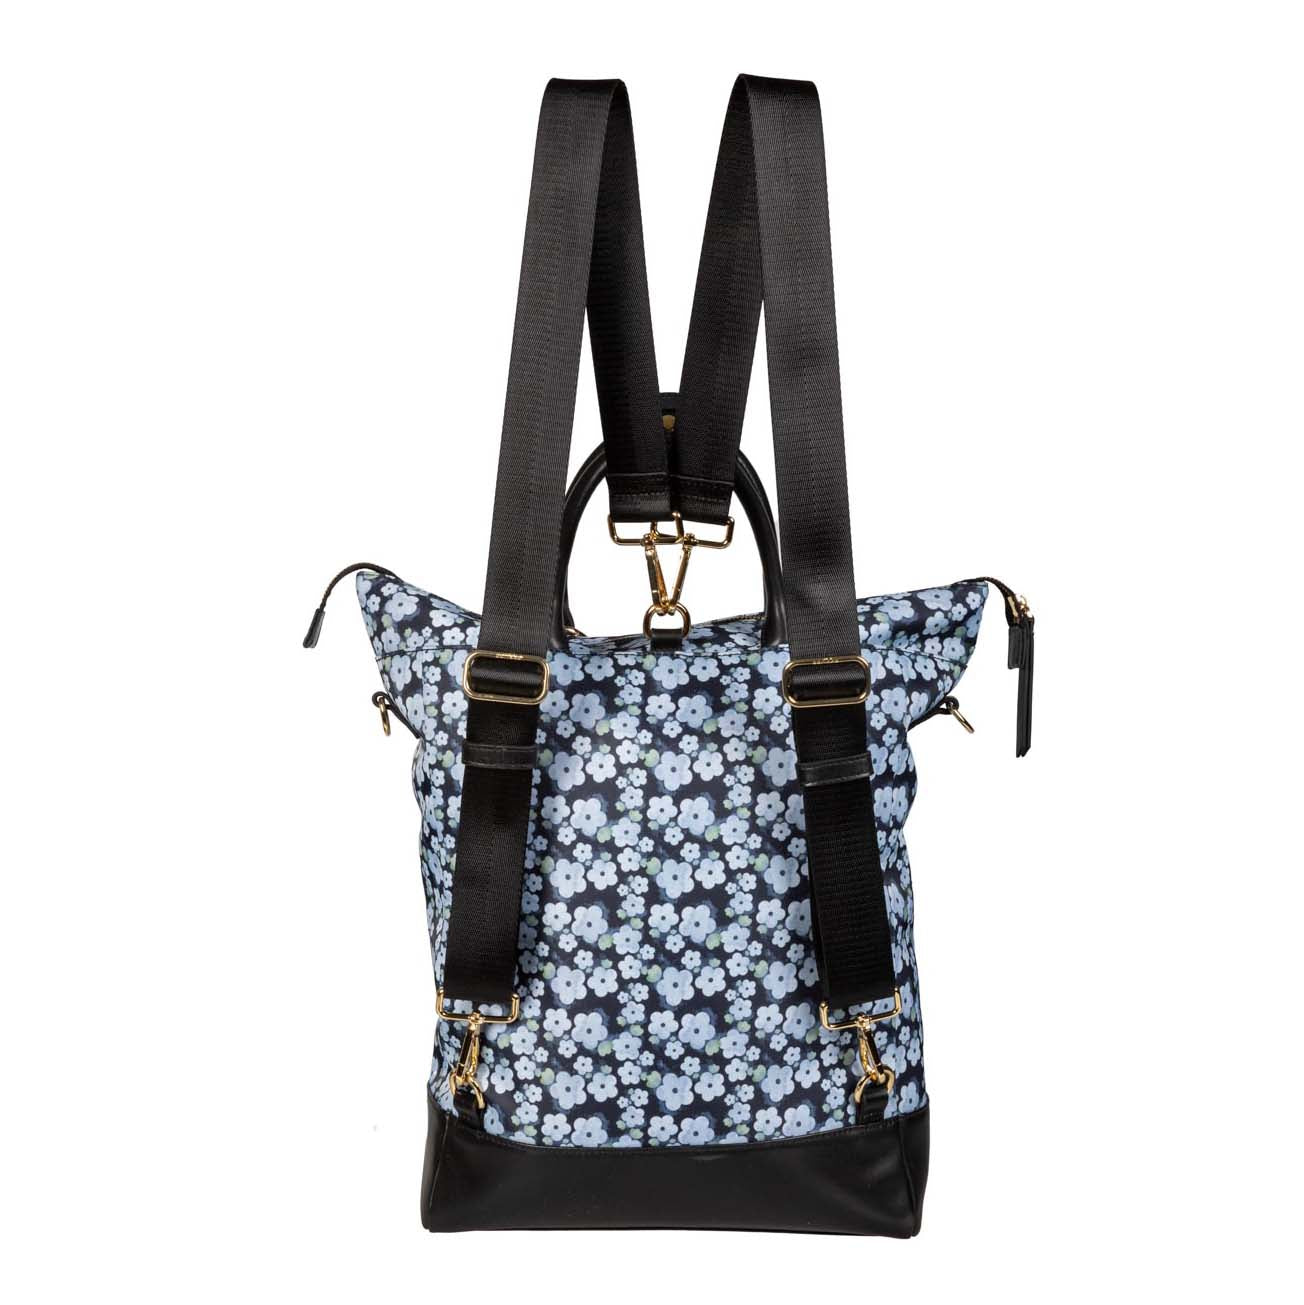 Brita backpack, forget-me-not